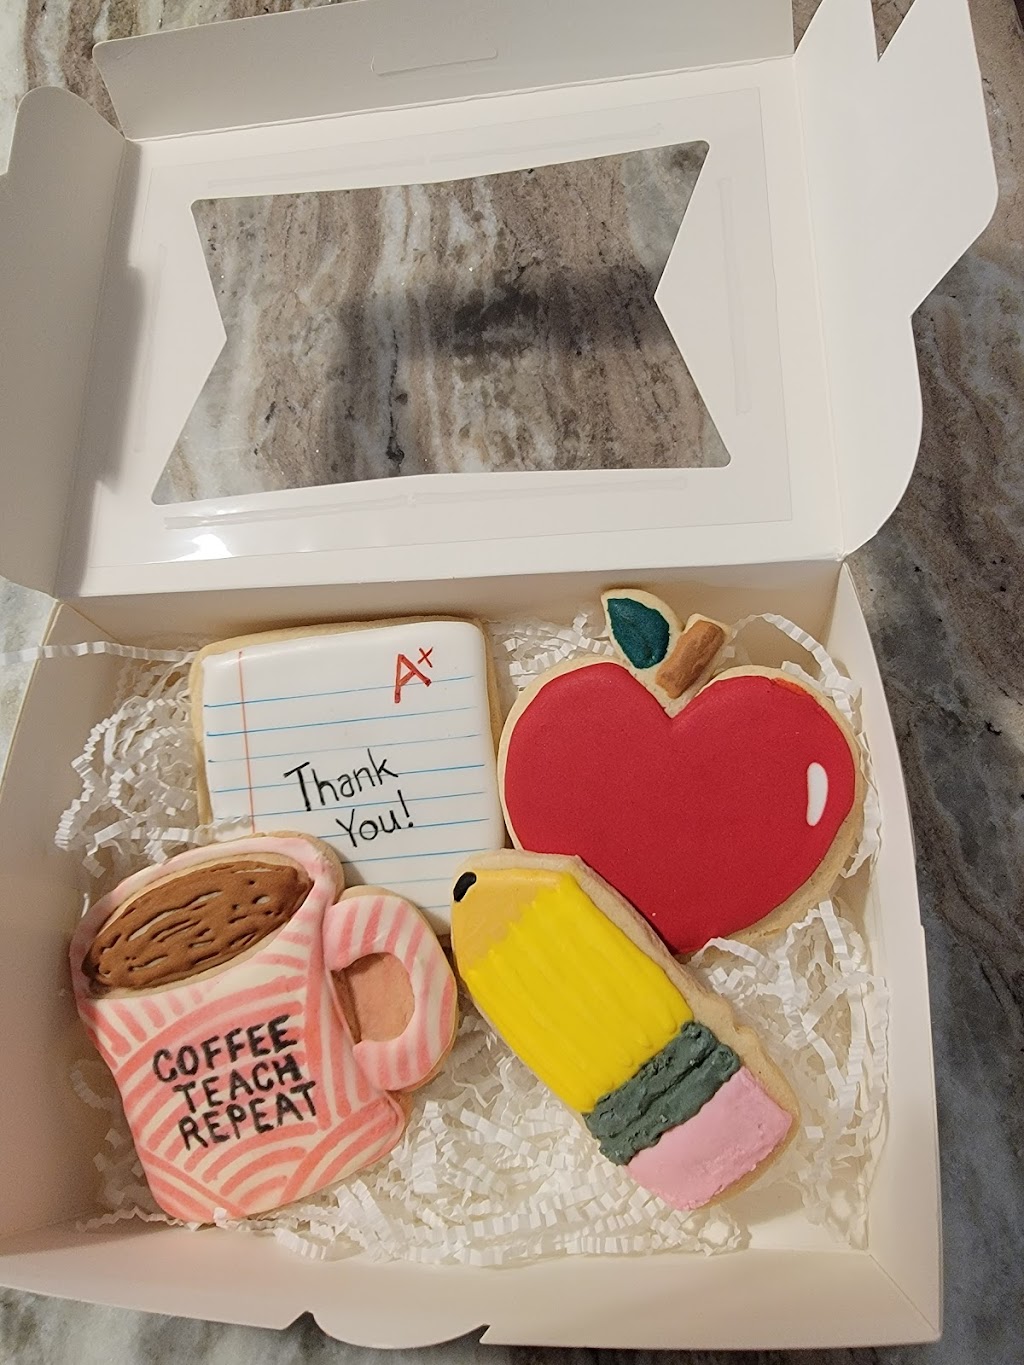 Creative Cookies by Dale | 10537 Spring Ct, La Plata, MD 20646 | Phone: (301) 246-2425